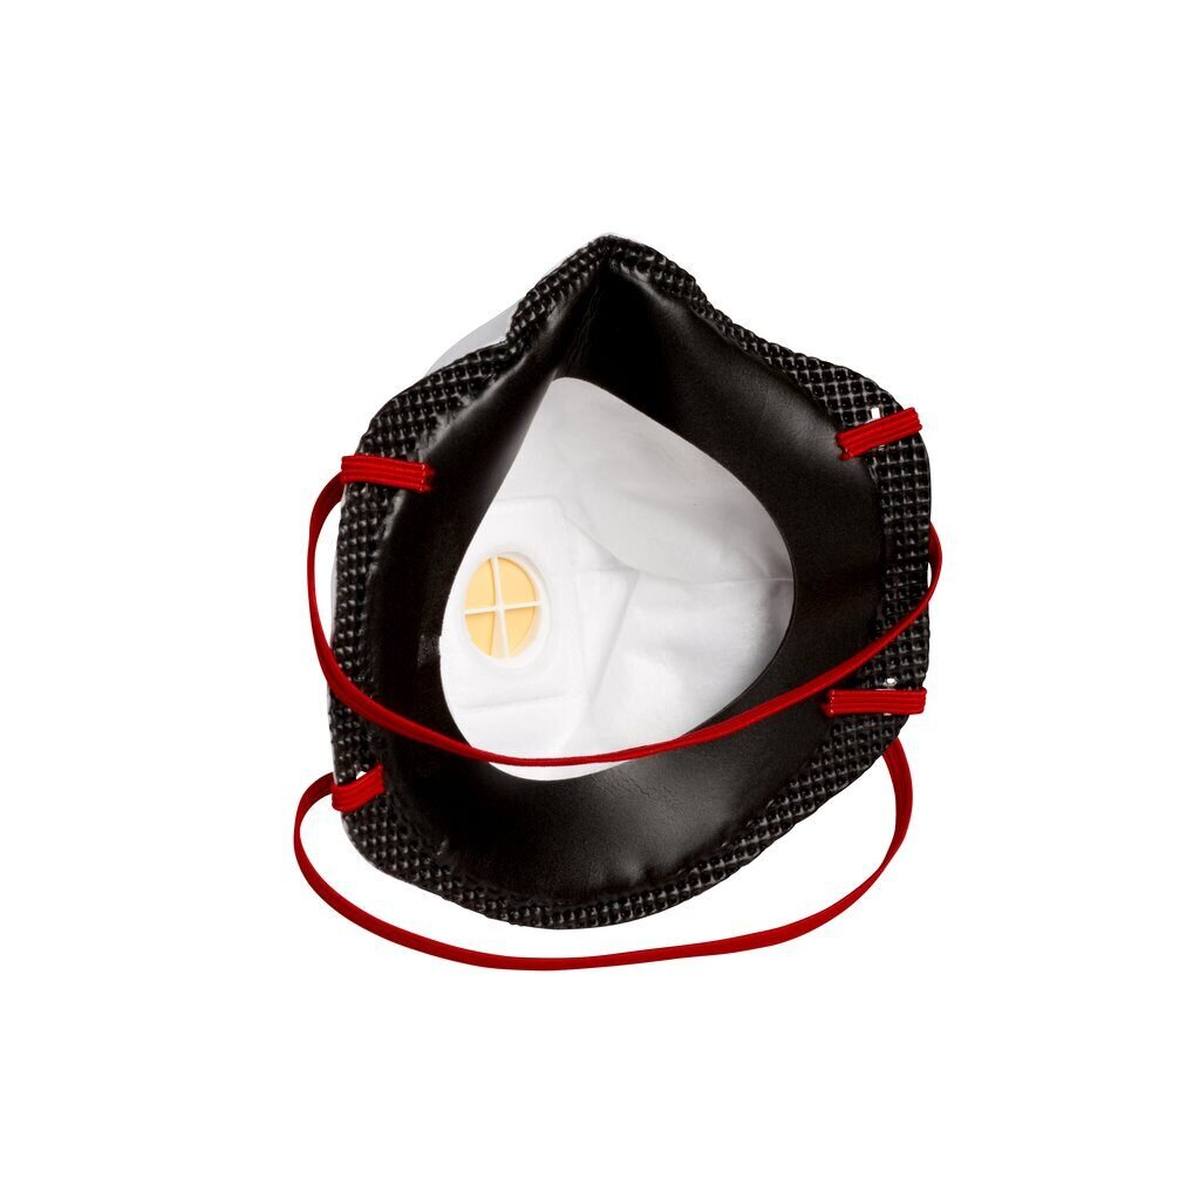 3M 8833SV Respirator FFP3 with cool-flow exhalation valve, up to 30 times the limit value, small pack